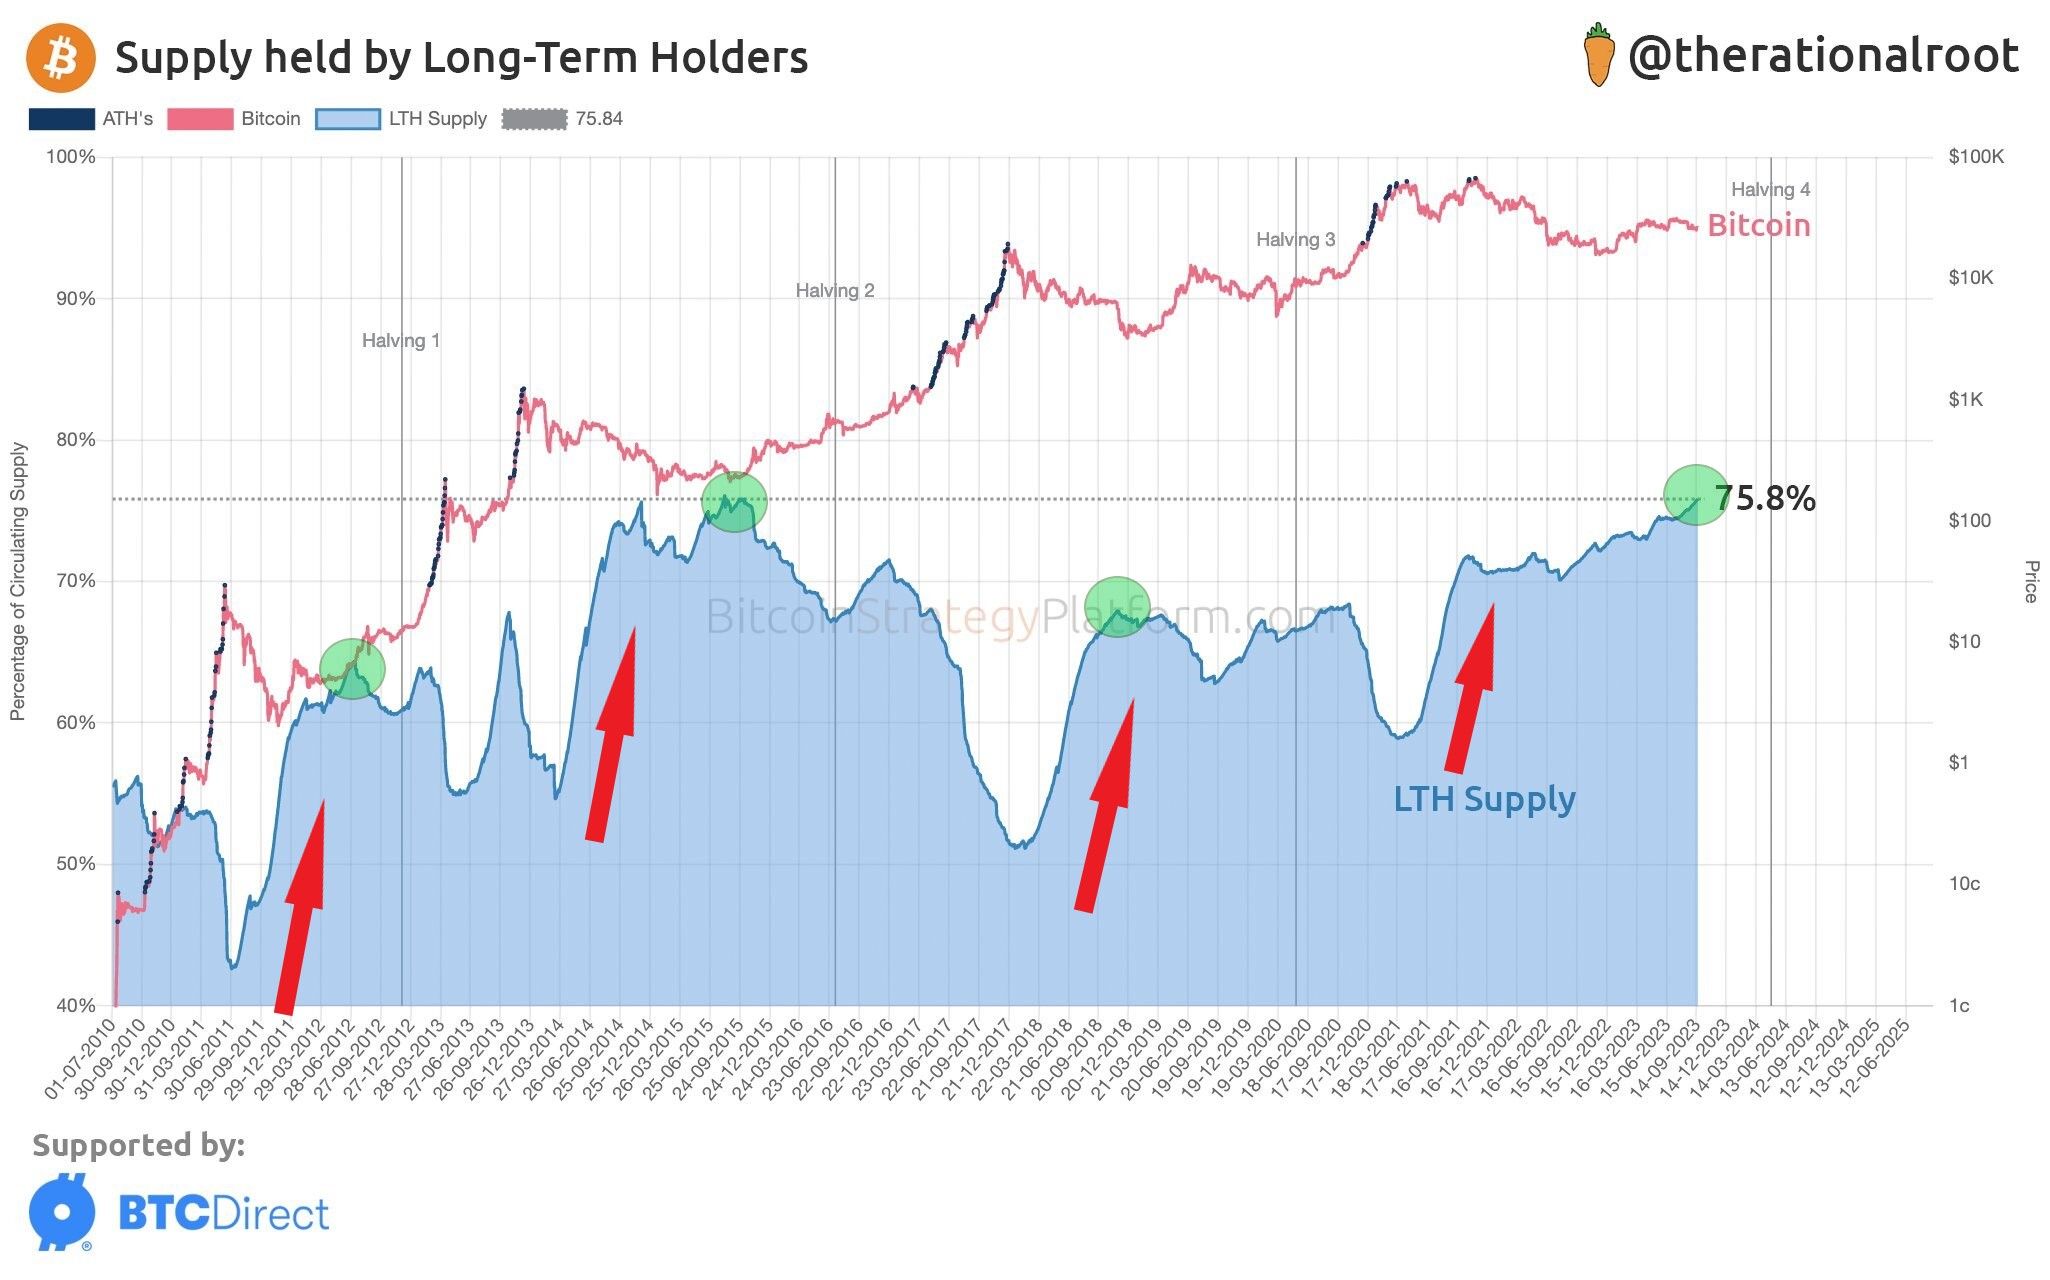 Supply held by Long-Term Holders